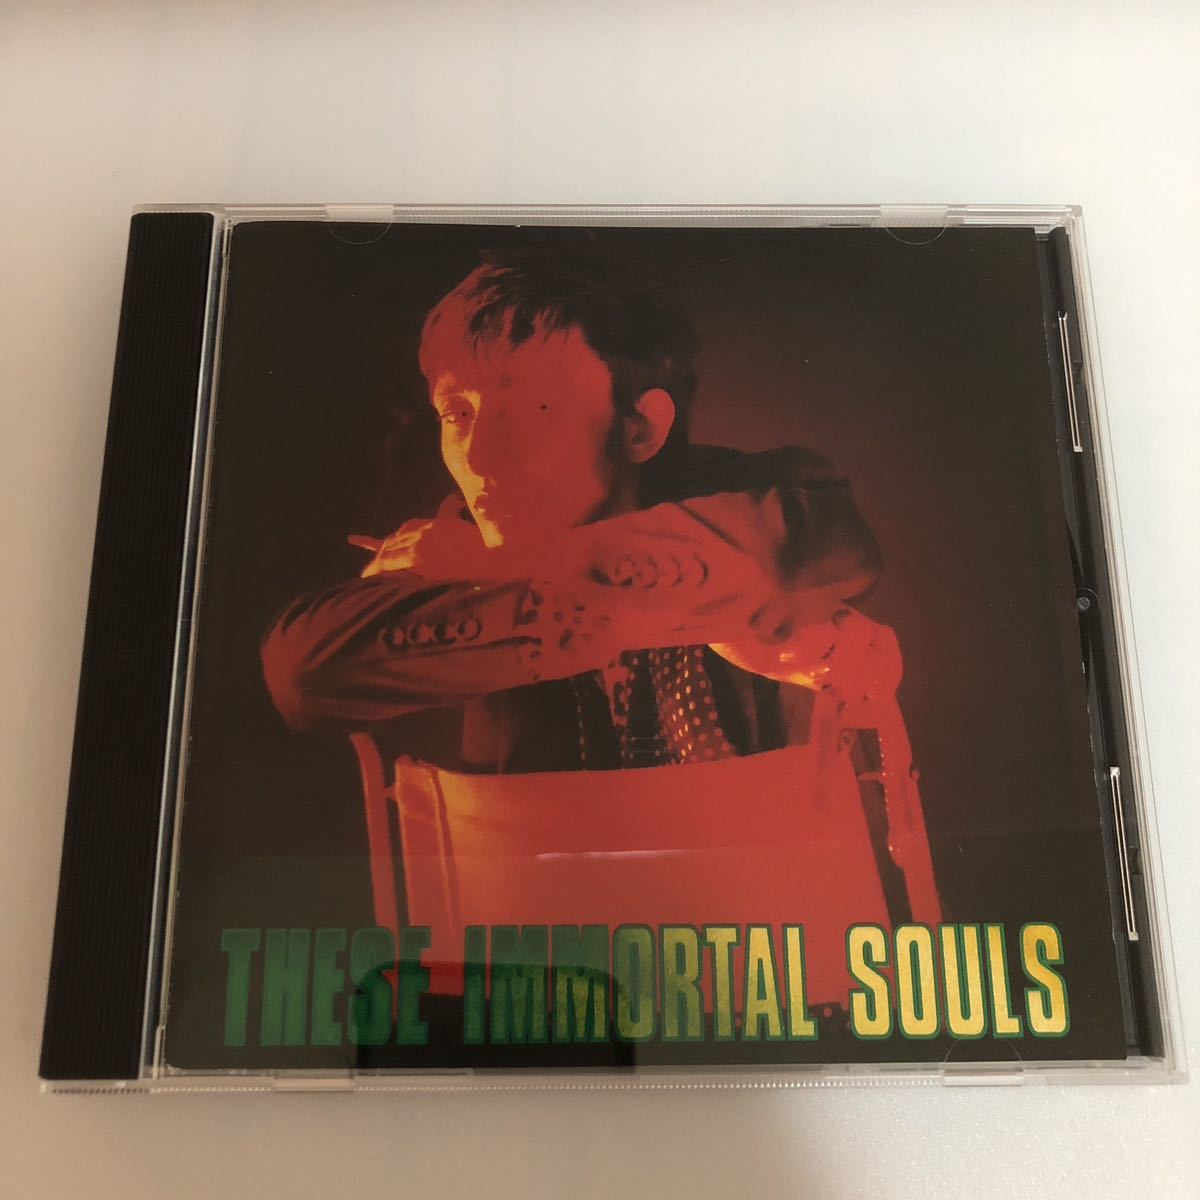 These Immortal Souls / I'm Never Gonna Die Again CD Rowland S. Howard The Birthday Party 国内盤 歌詞対訳付き NICK CAVE_画像1